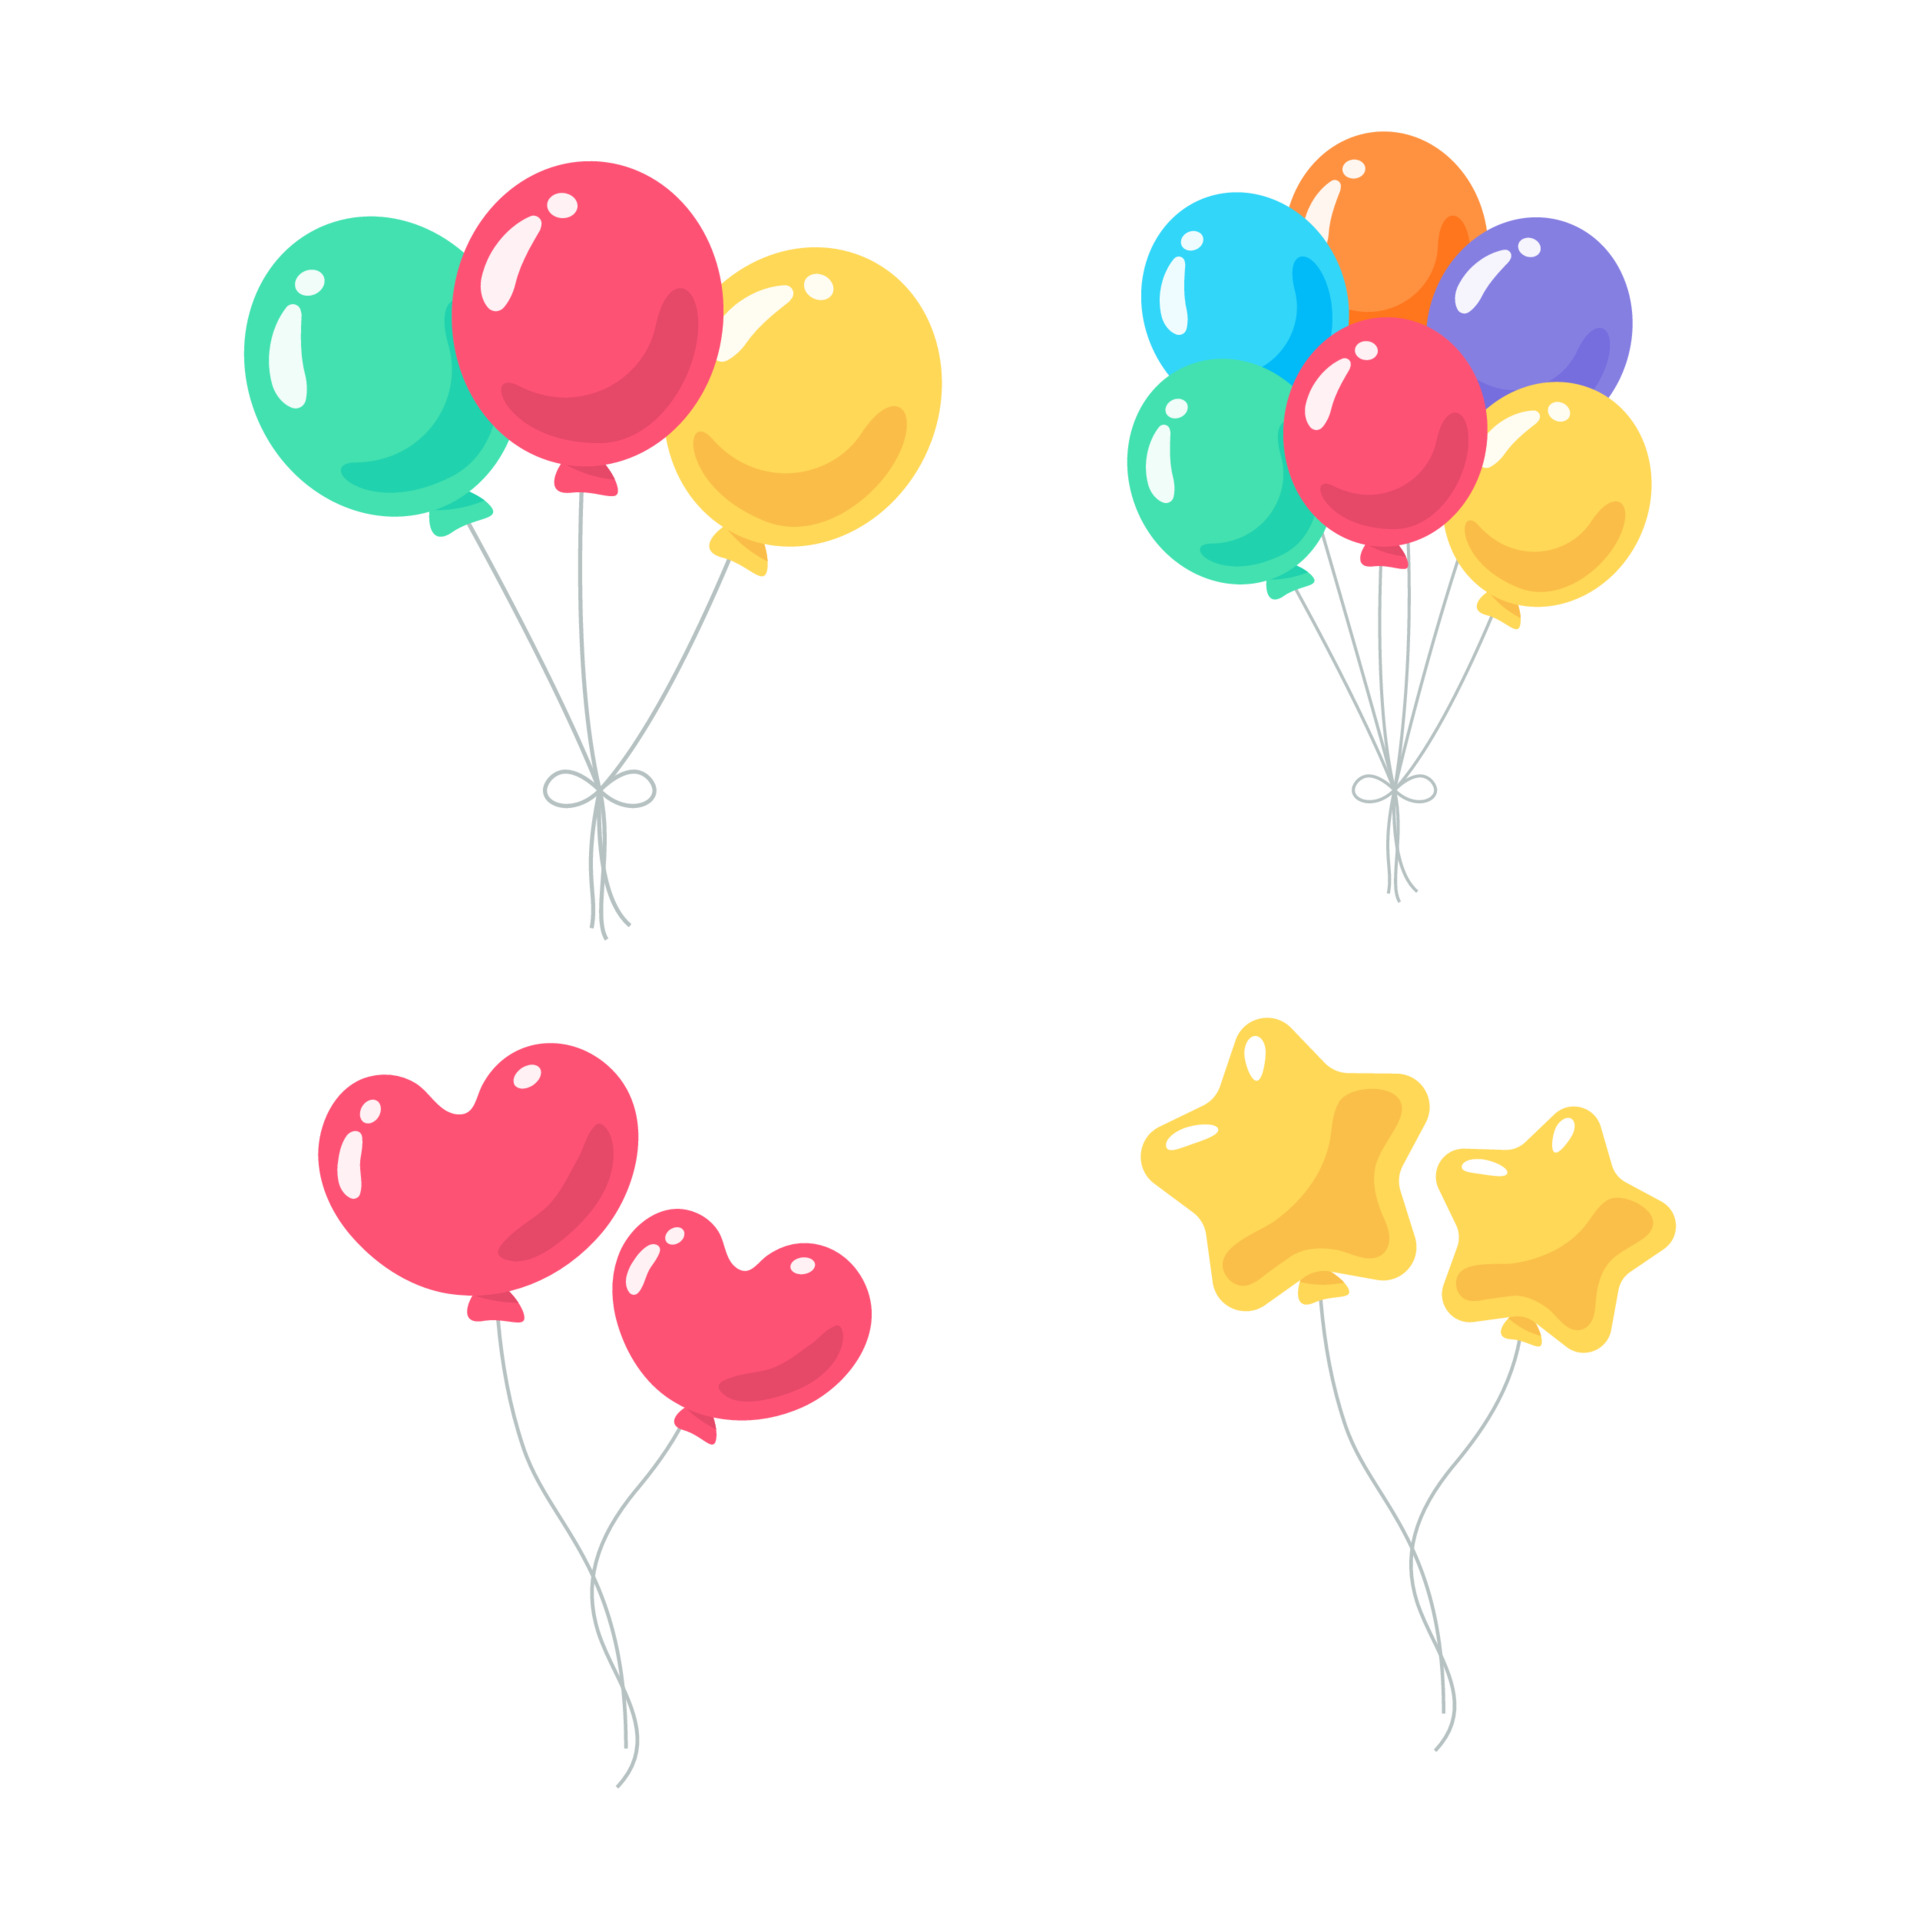 Balloon vector. colorful balloons tied with string for kids